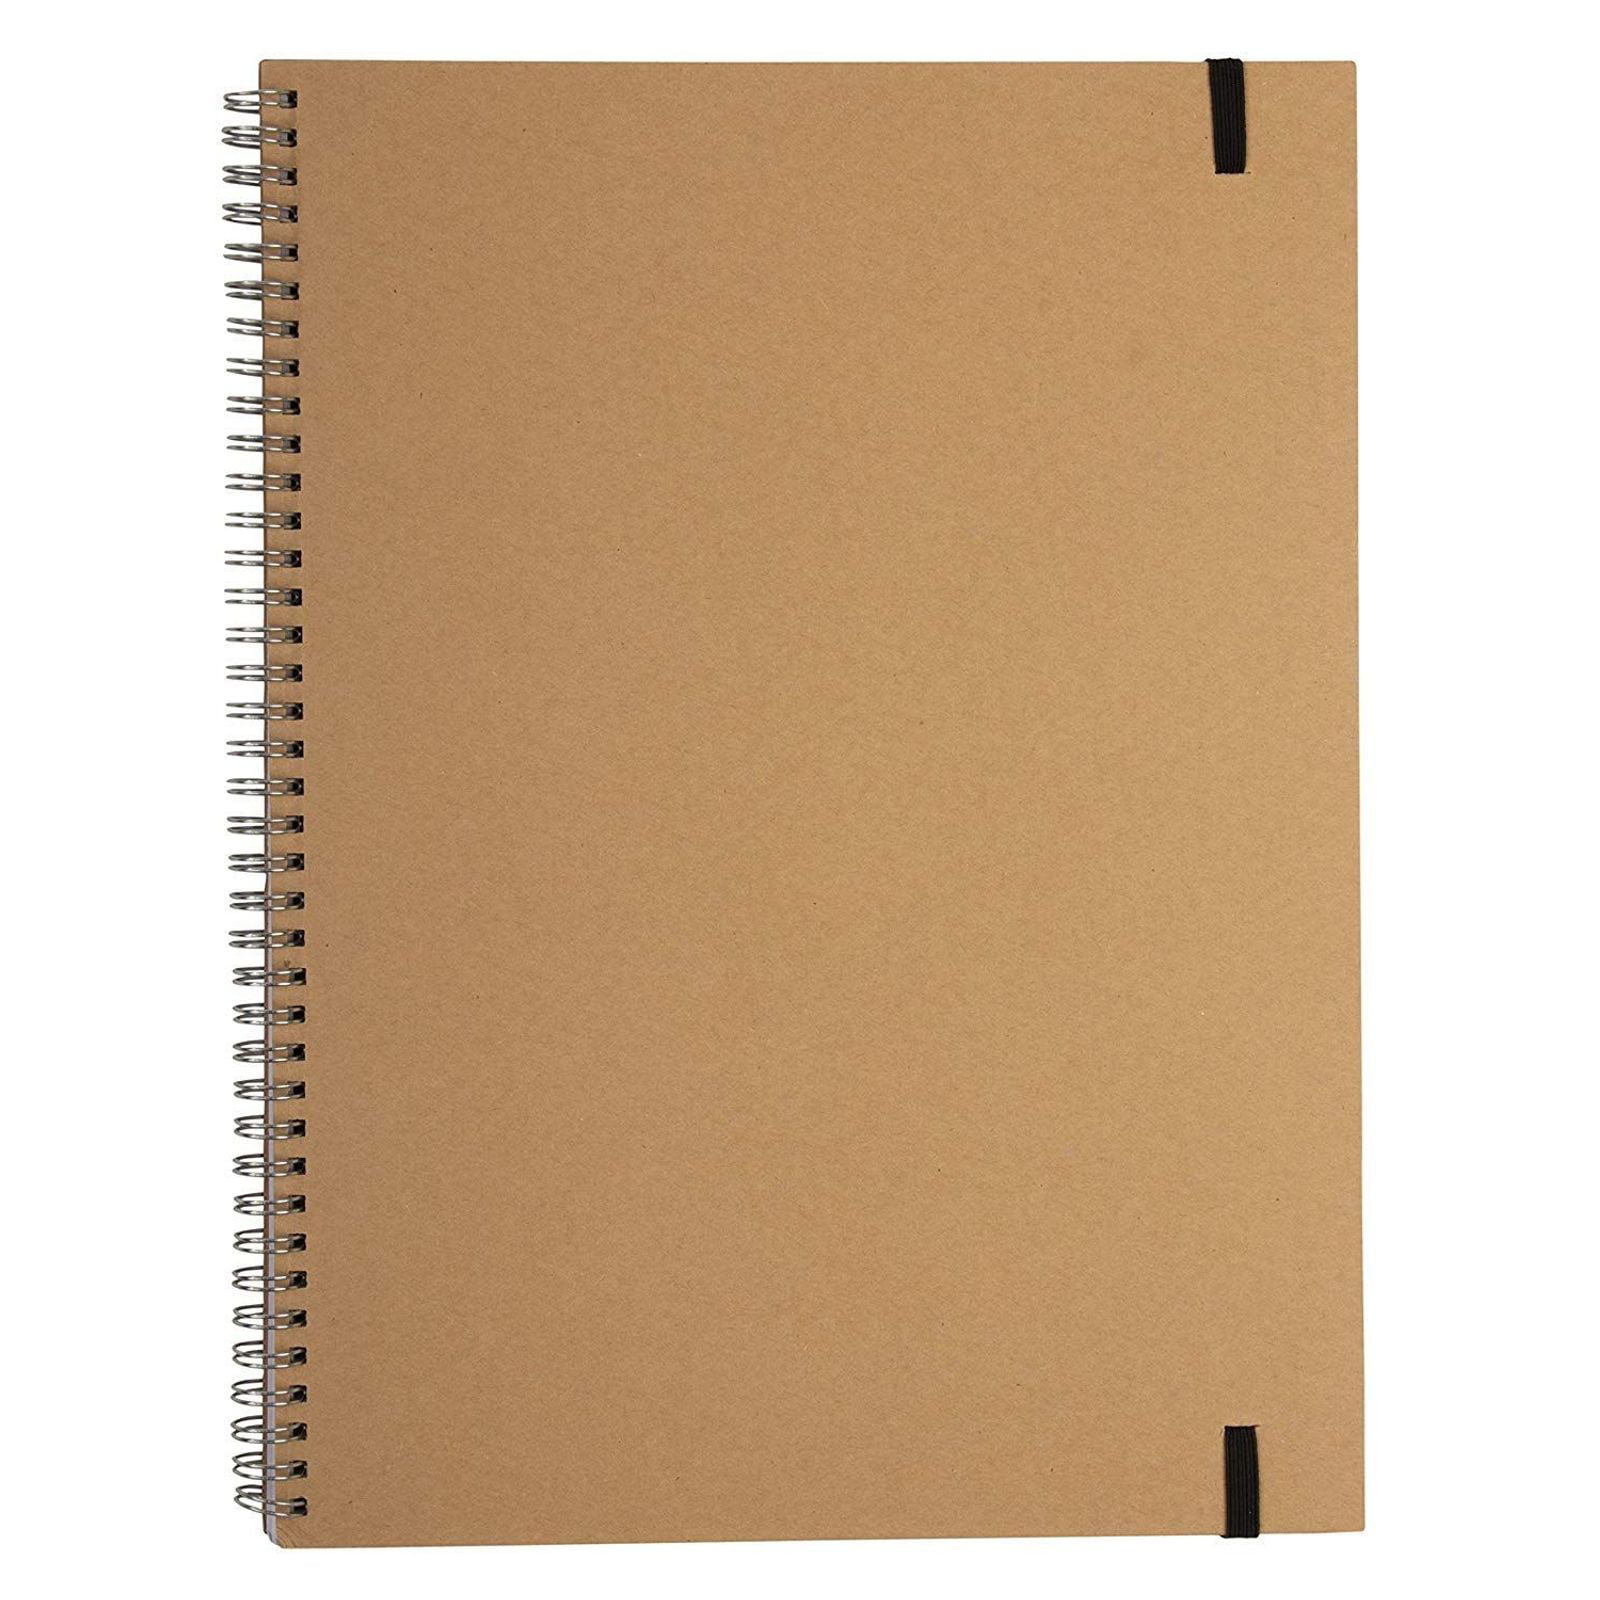 100 Pages 9.84 x 7.28 Inch 50 Sheets Solvang 2 Pcs B5 Spiral Lined Notebooks Kraft Cover Notepads for Travel School